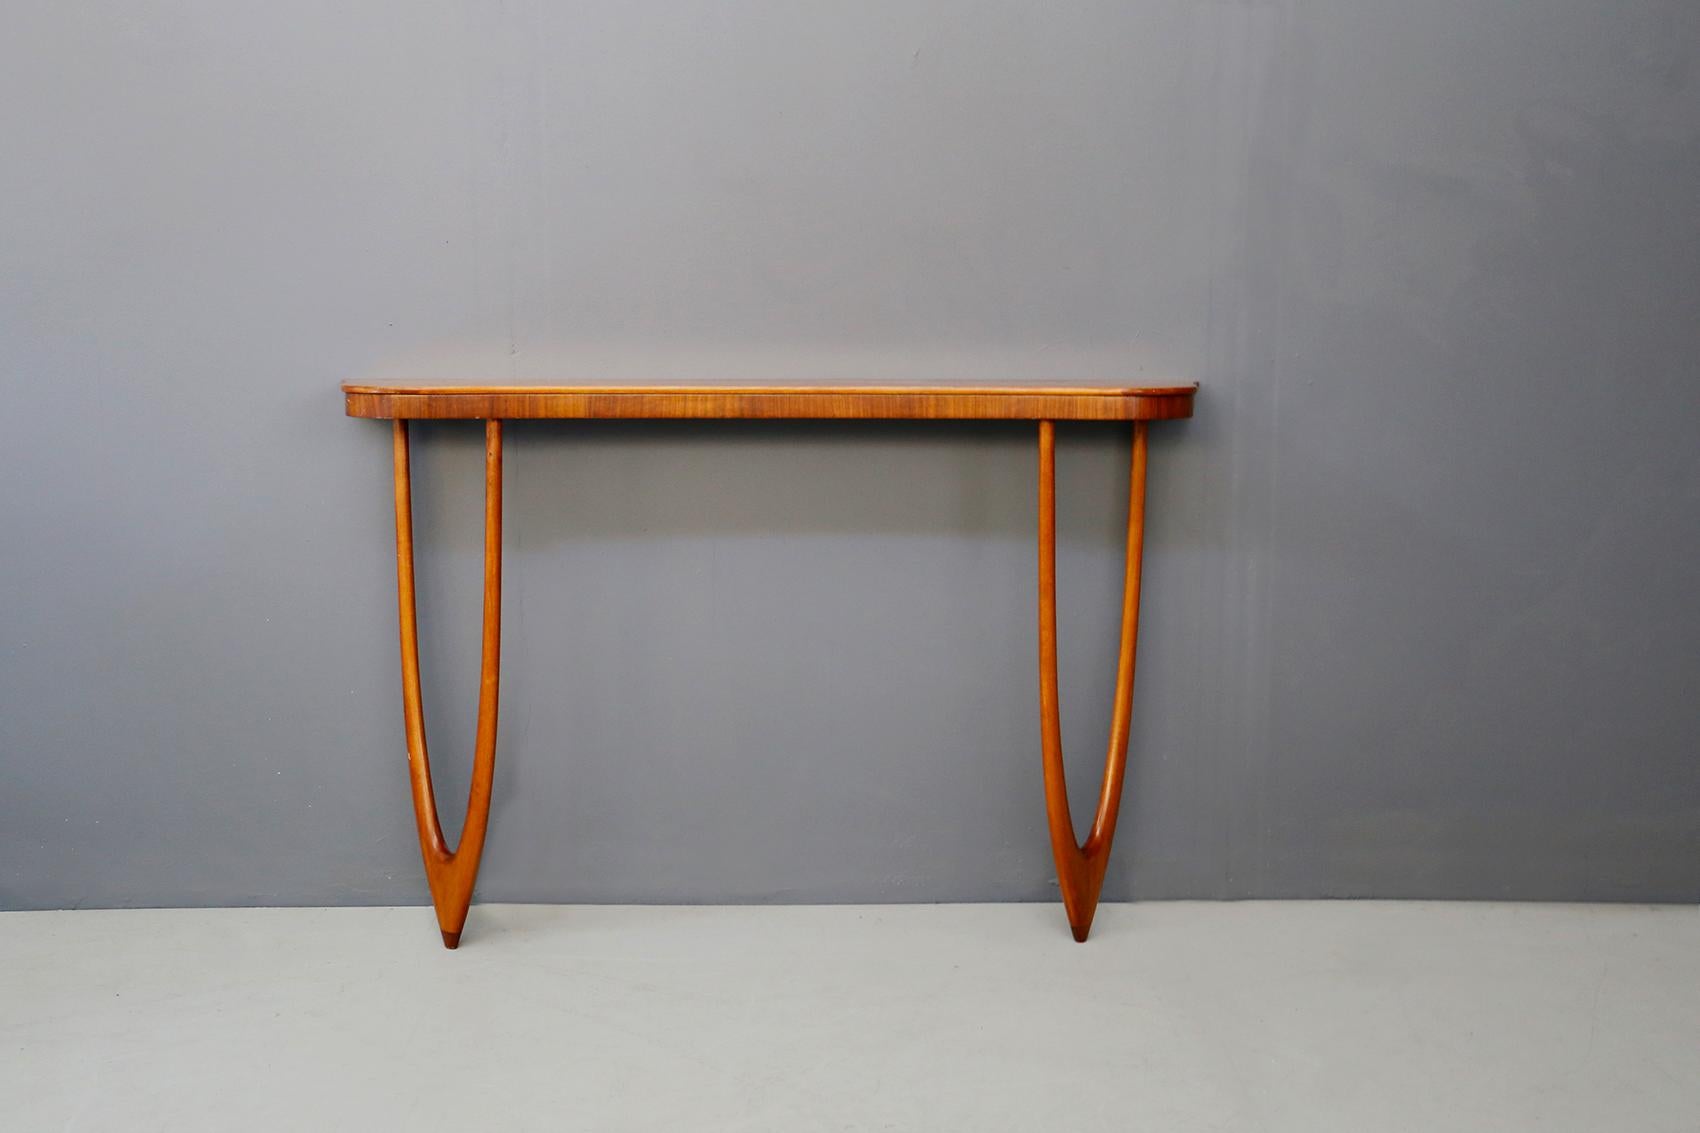 Elegant wall console attributed to the Italian designer Cesare Lacca of the 1960s. The console is made of oakwood and is designed with two curved wooden legs. The peculiarity of the console is its semi-oval shaped legs that support its support